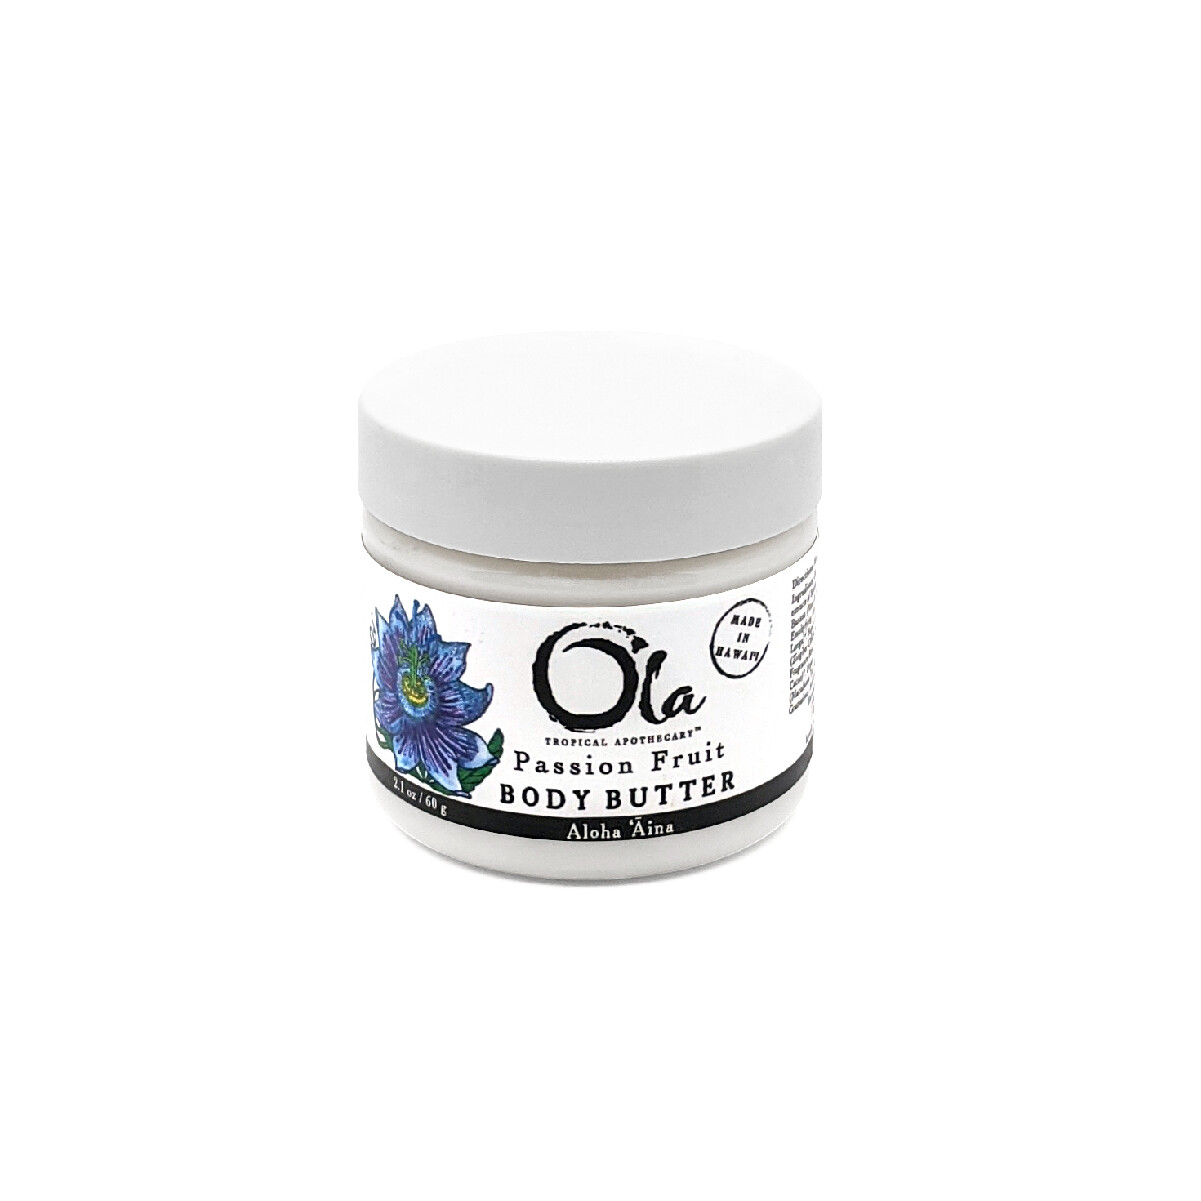 Ola Tropical Apothecary, Body Butter - Passion Fruit (2 Oz.)